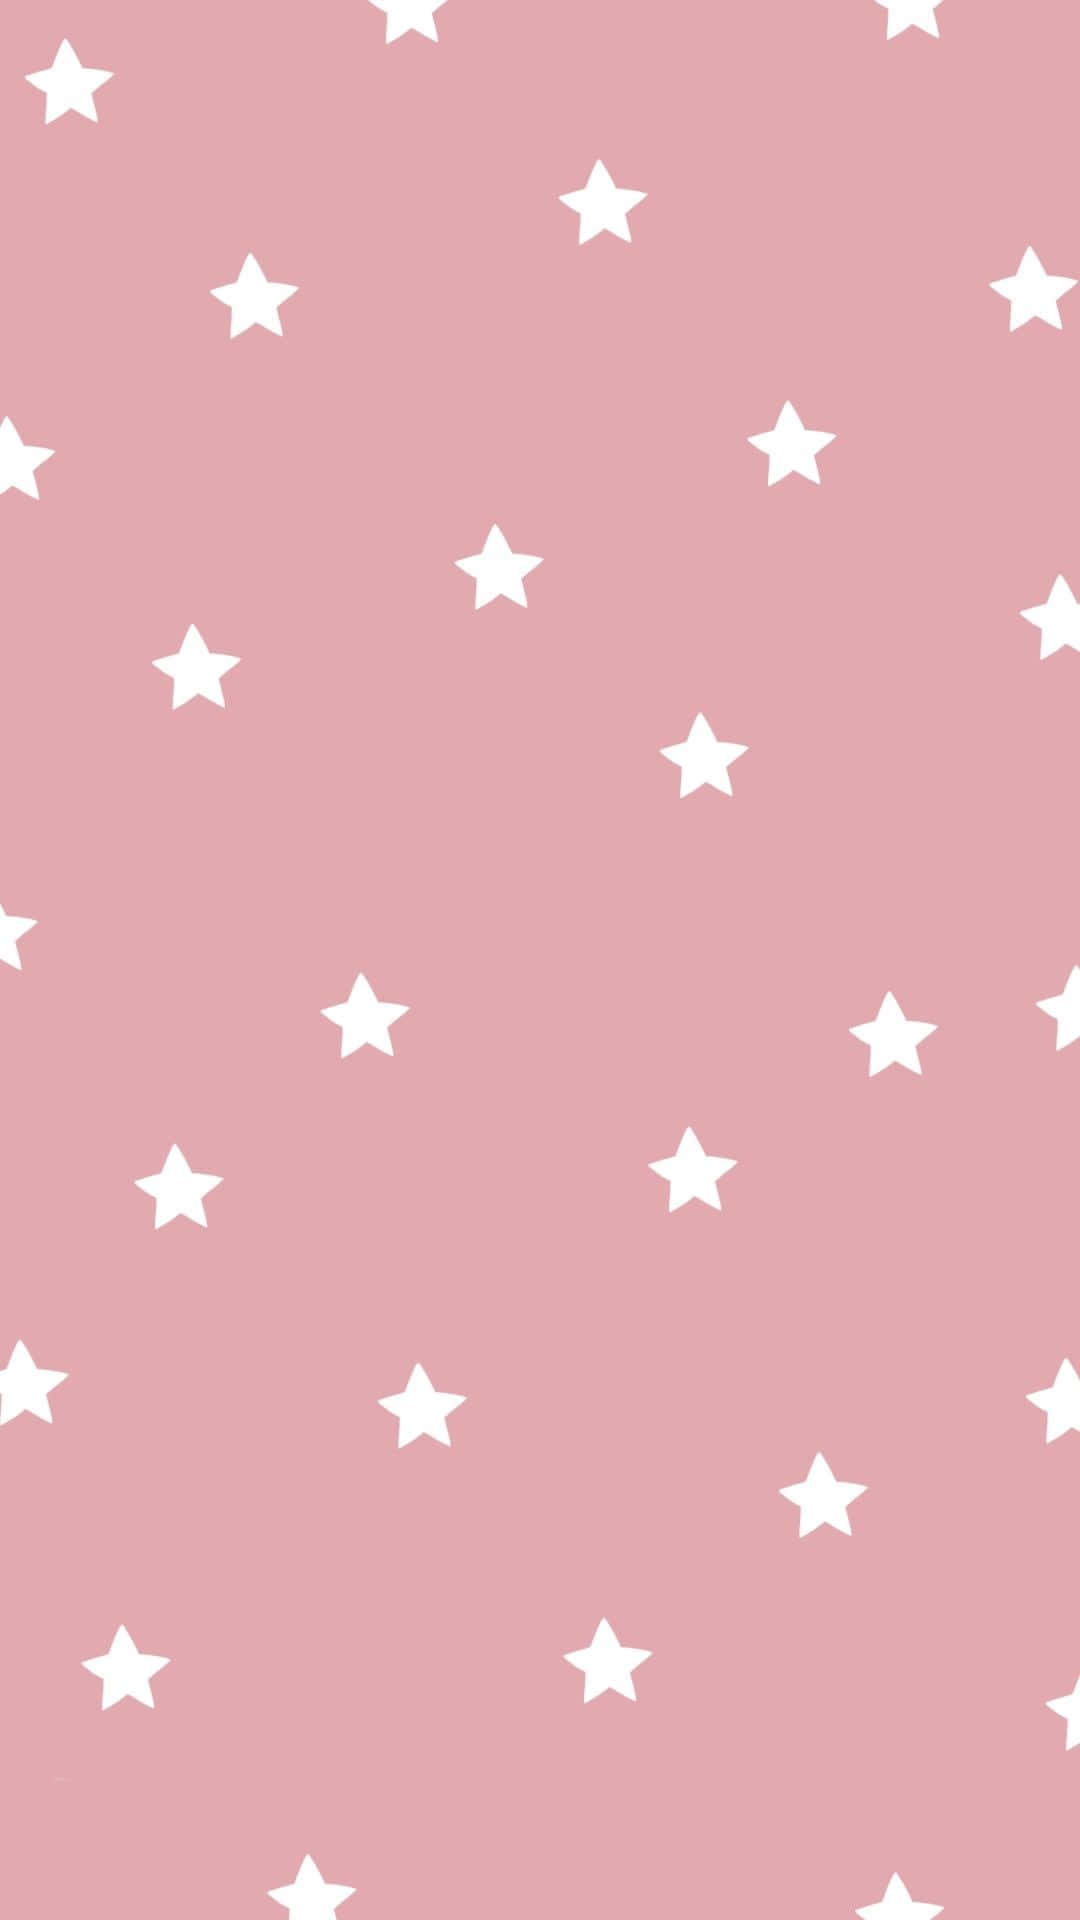 A Pink And White Star Pattern Wallpaper Wallpaper